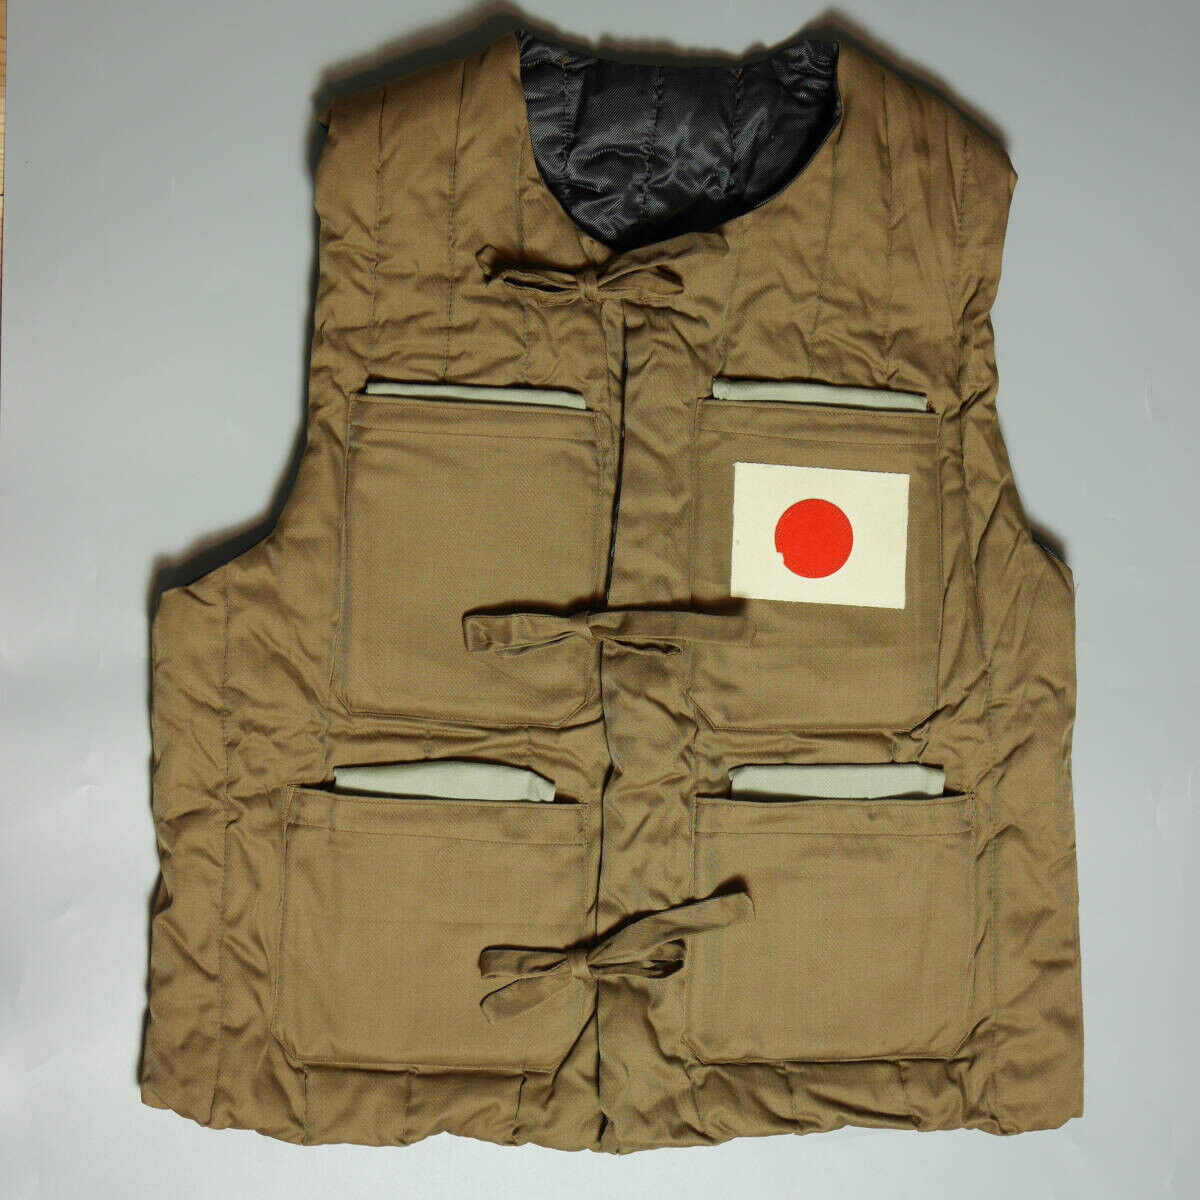 Former Japanese Army Original bulletproof vest for officer private WWⅡ military